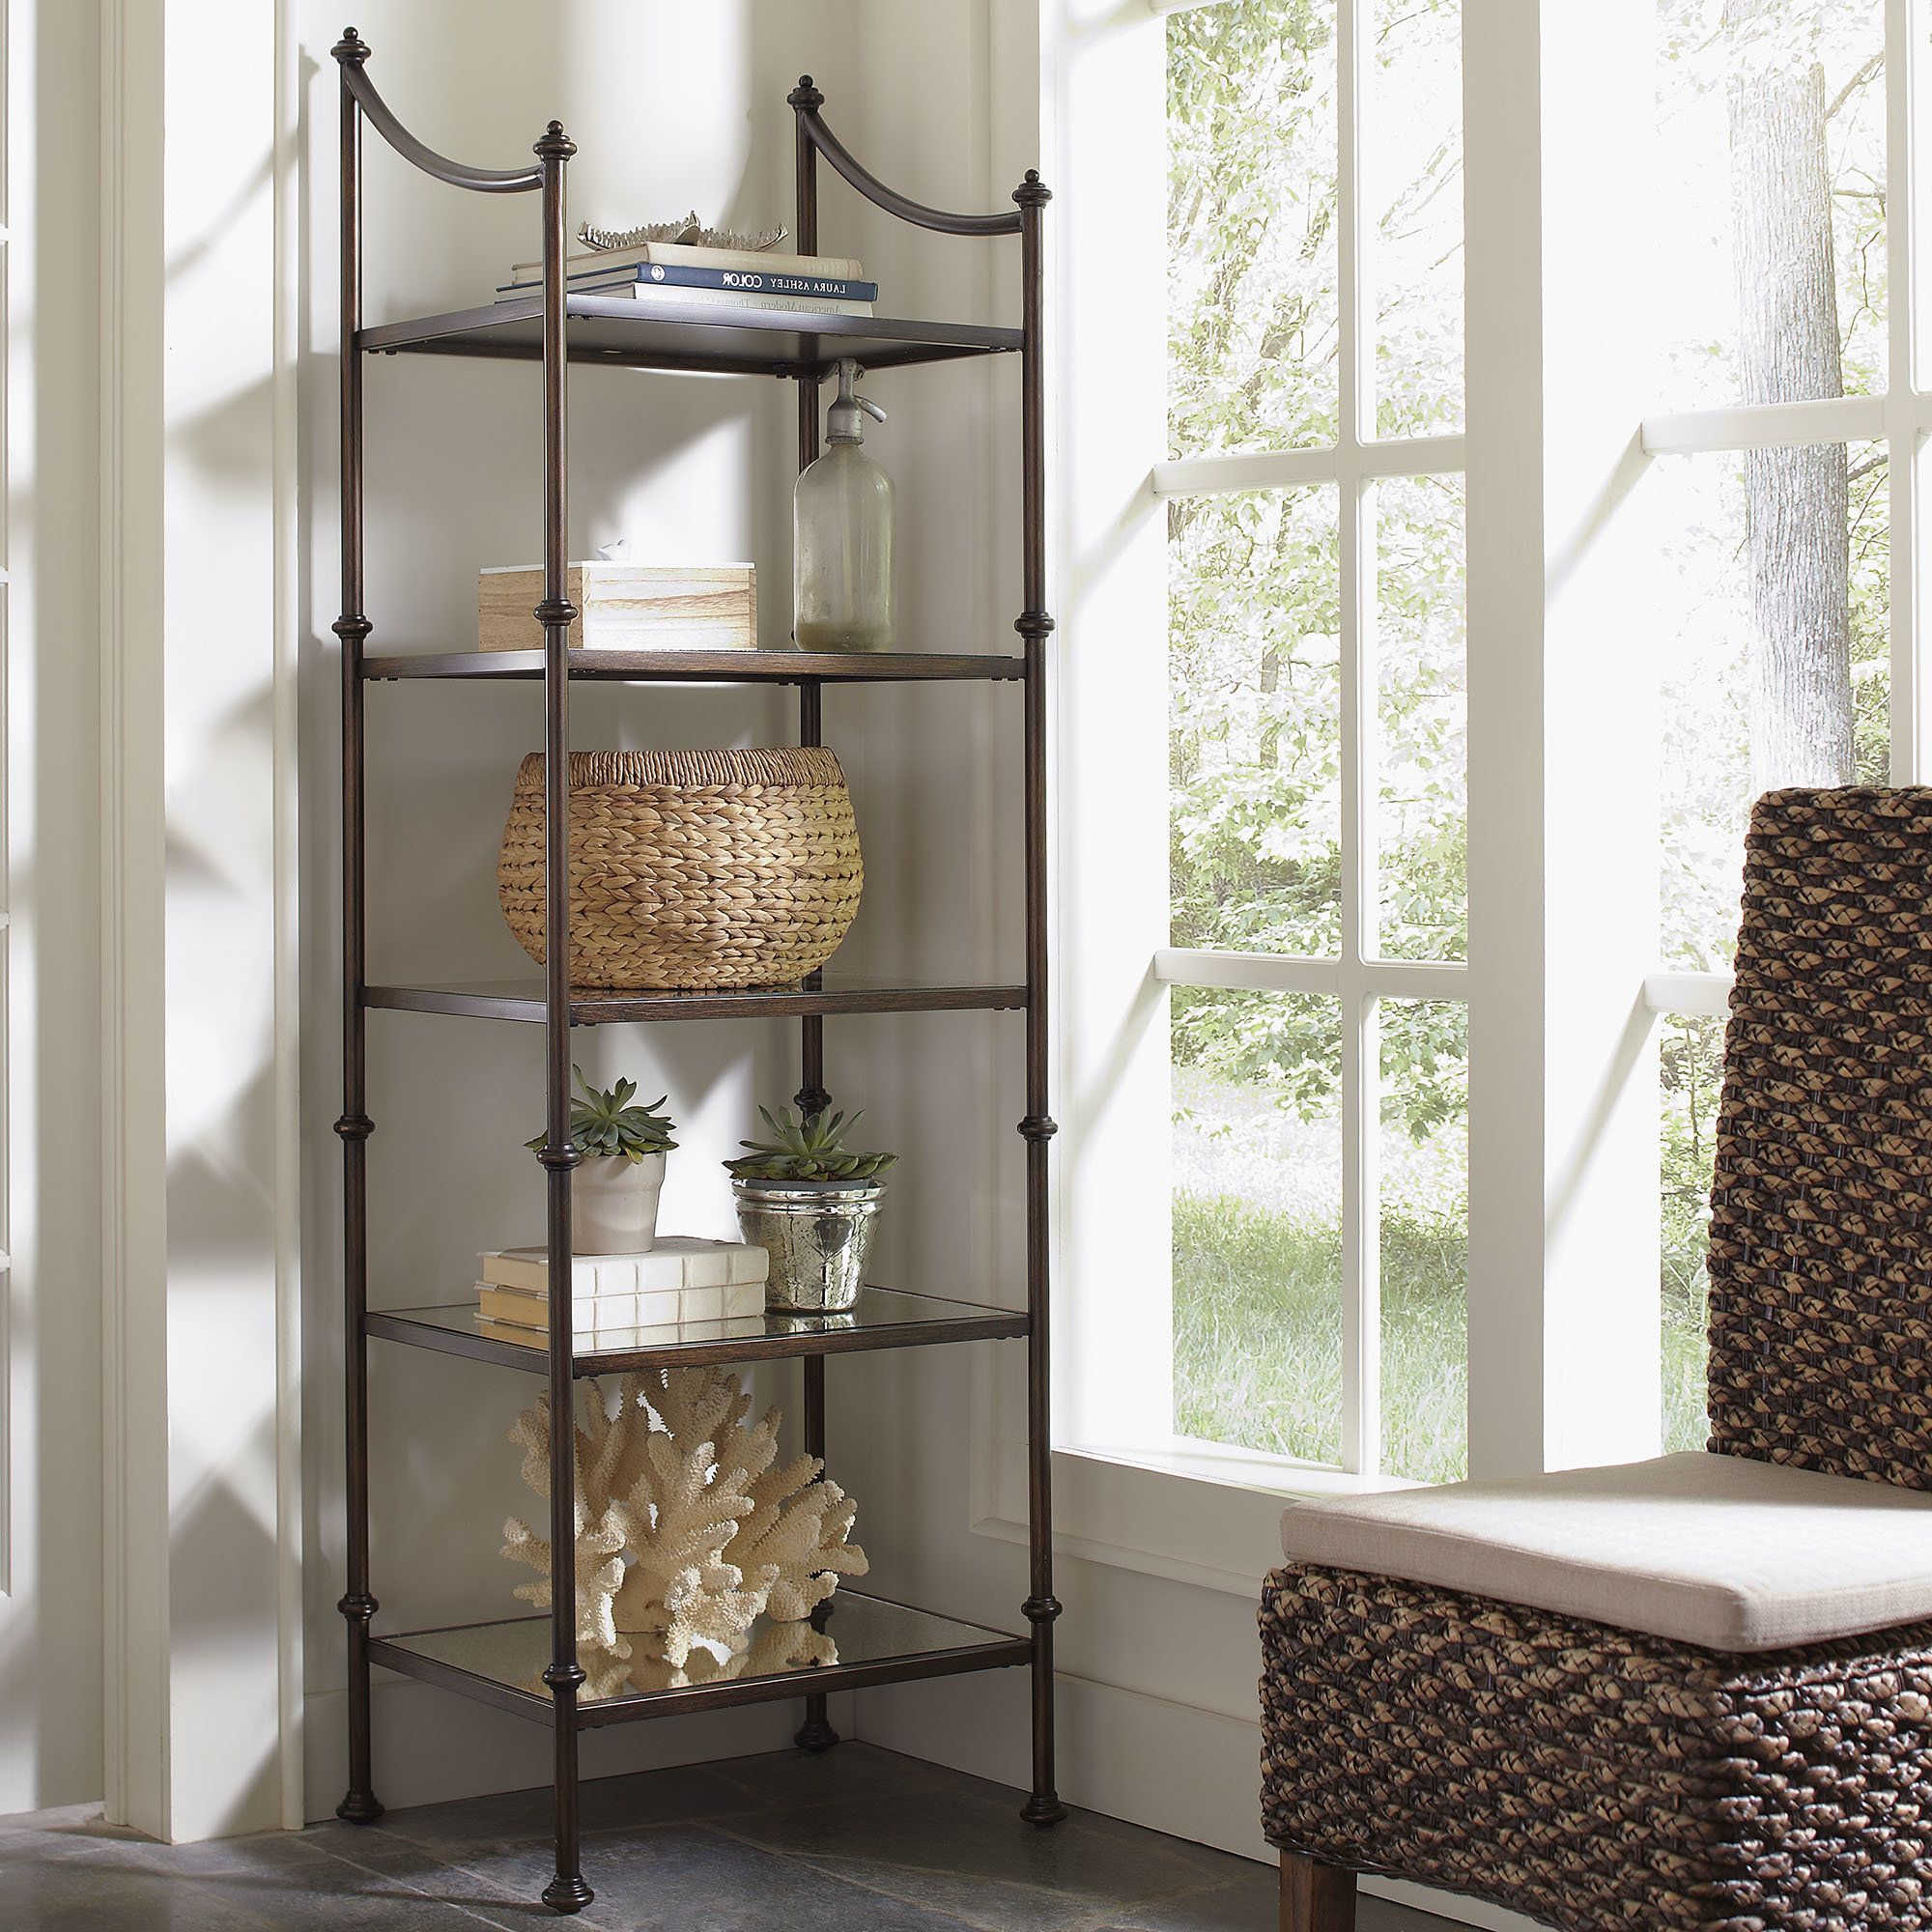 Fashionable Caldwell Etagere Bookcases Throughout Caldwell Etagere Bookcase (View 1 of 20)